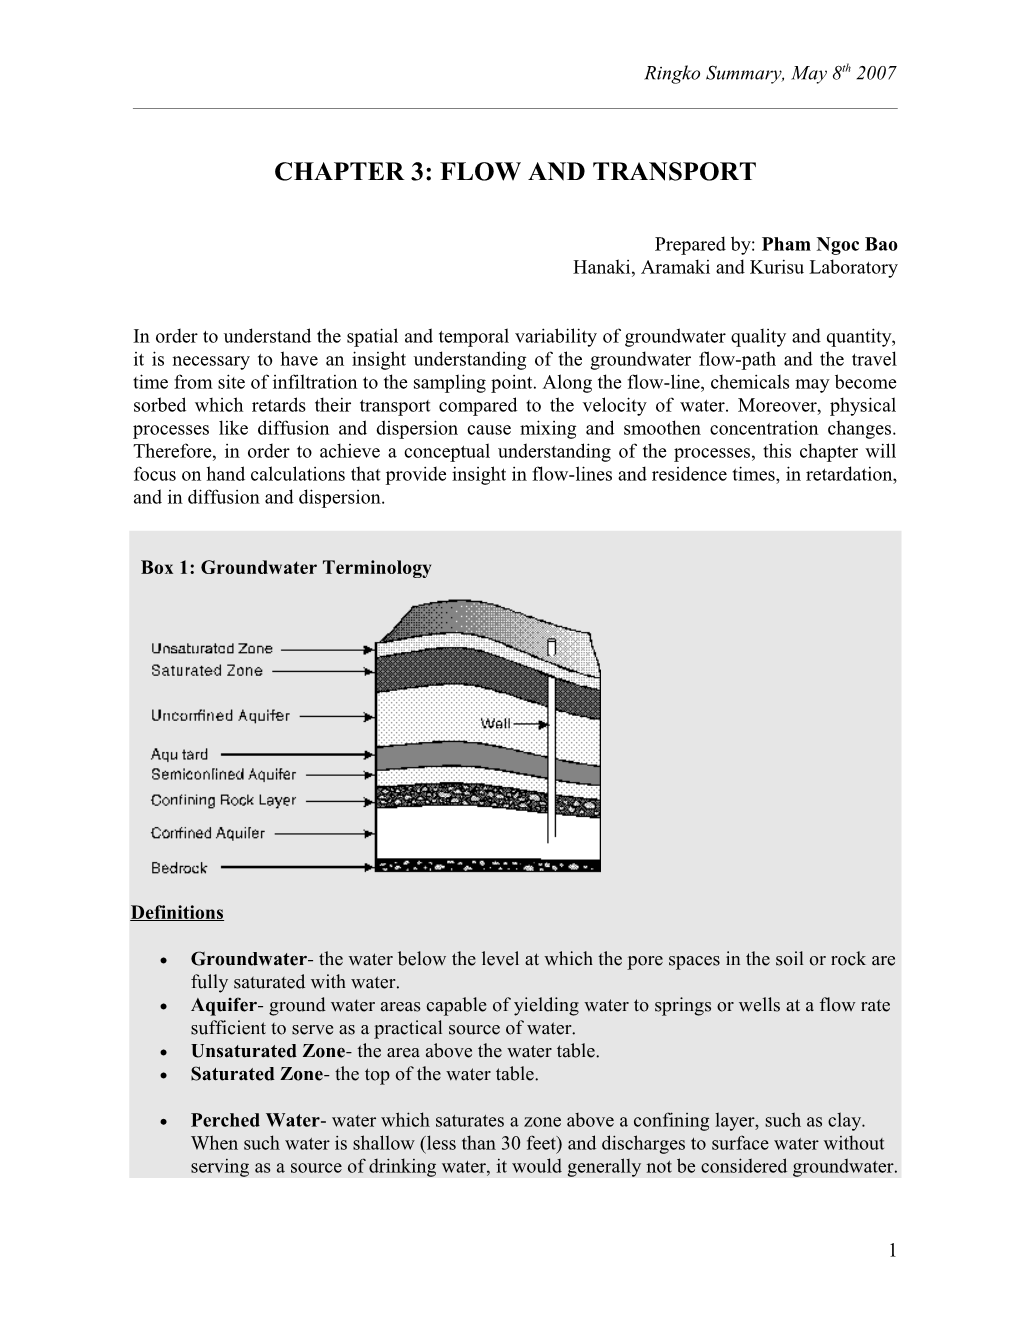 Chapter 3: Flow and Transport